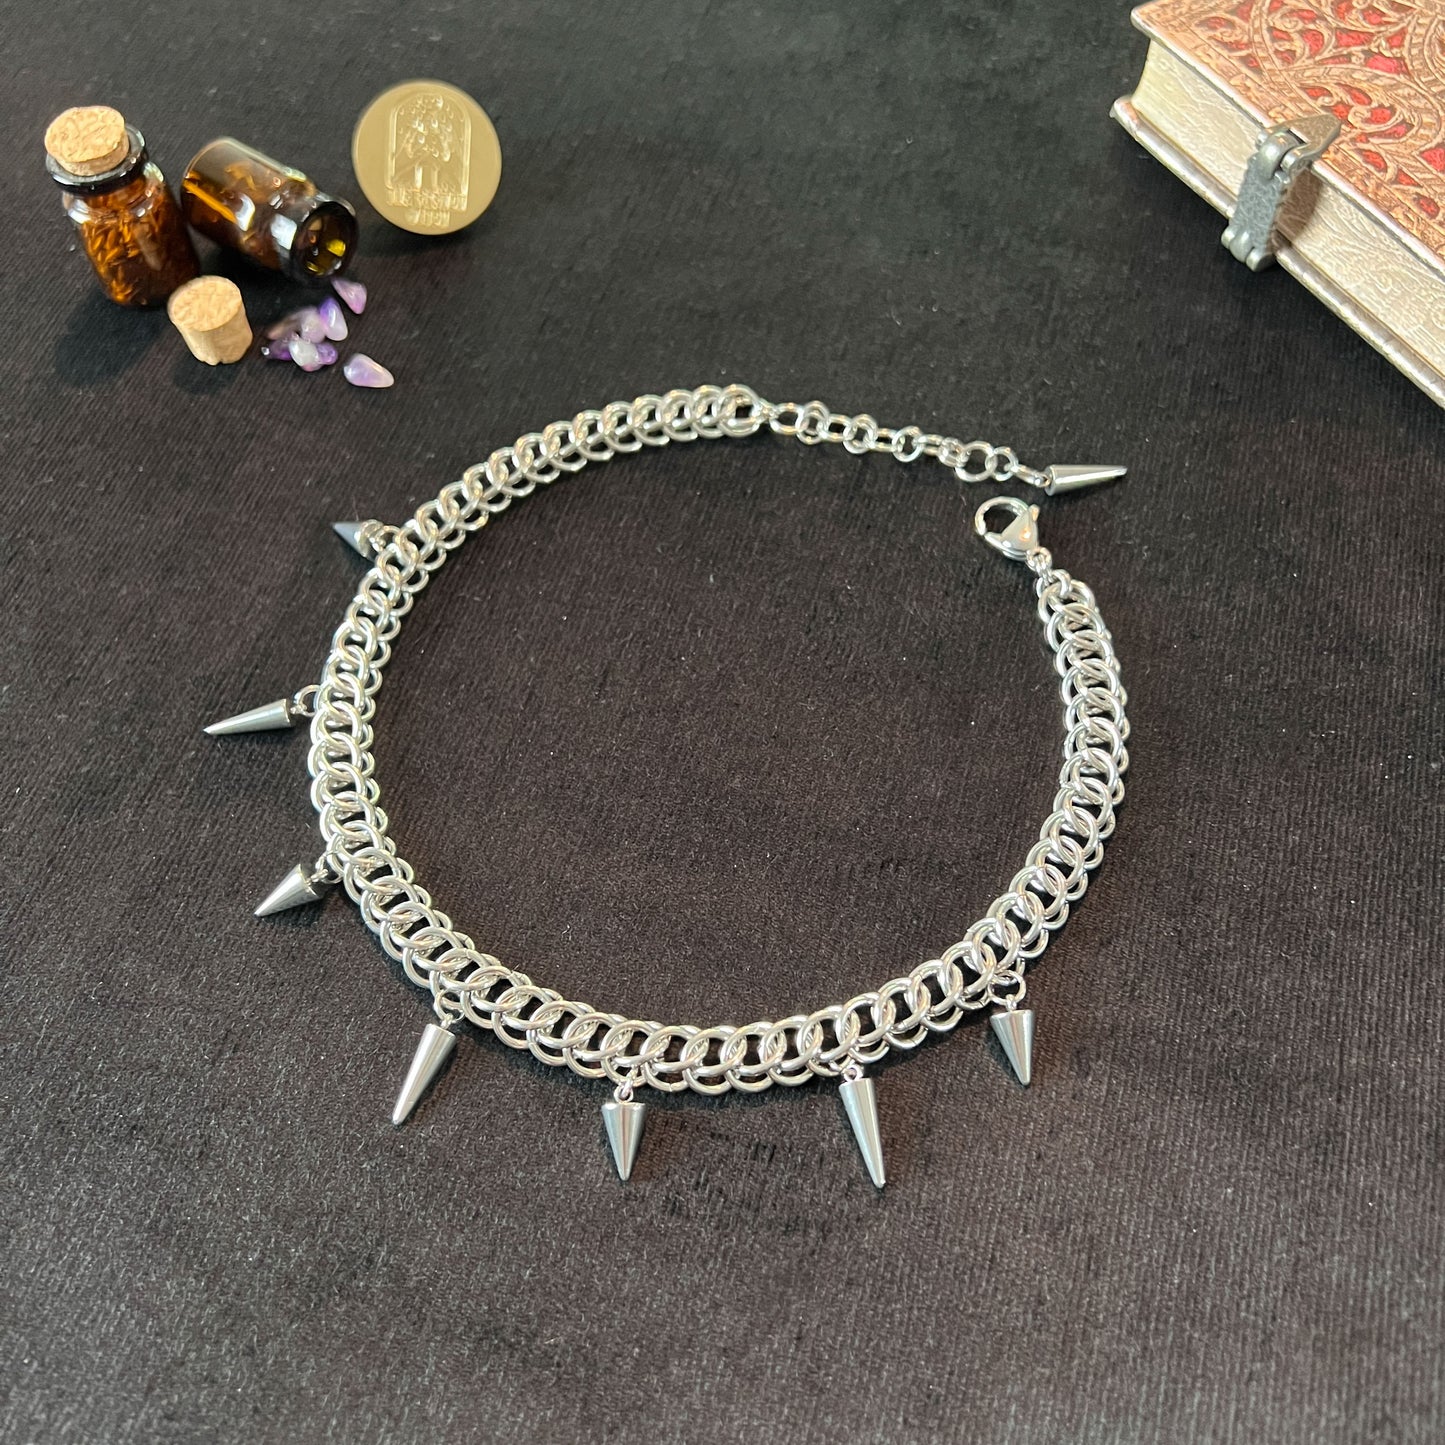 half persian gothic choker with spikes chainmail necklace alternative jewelry hypoallergenic stainless steel